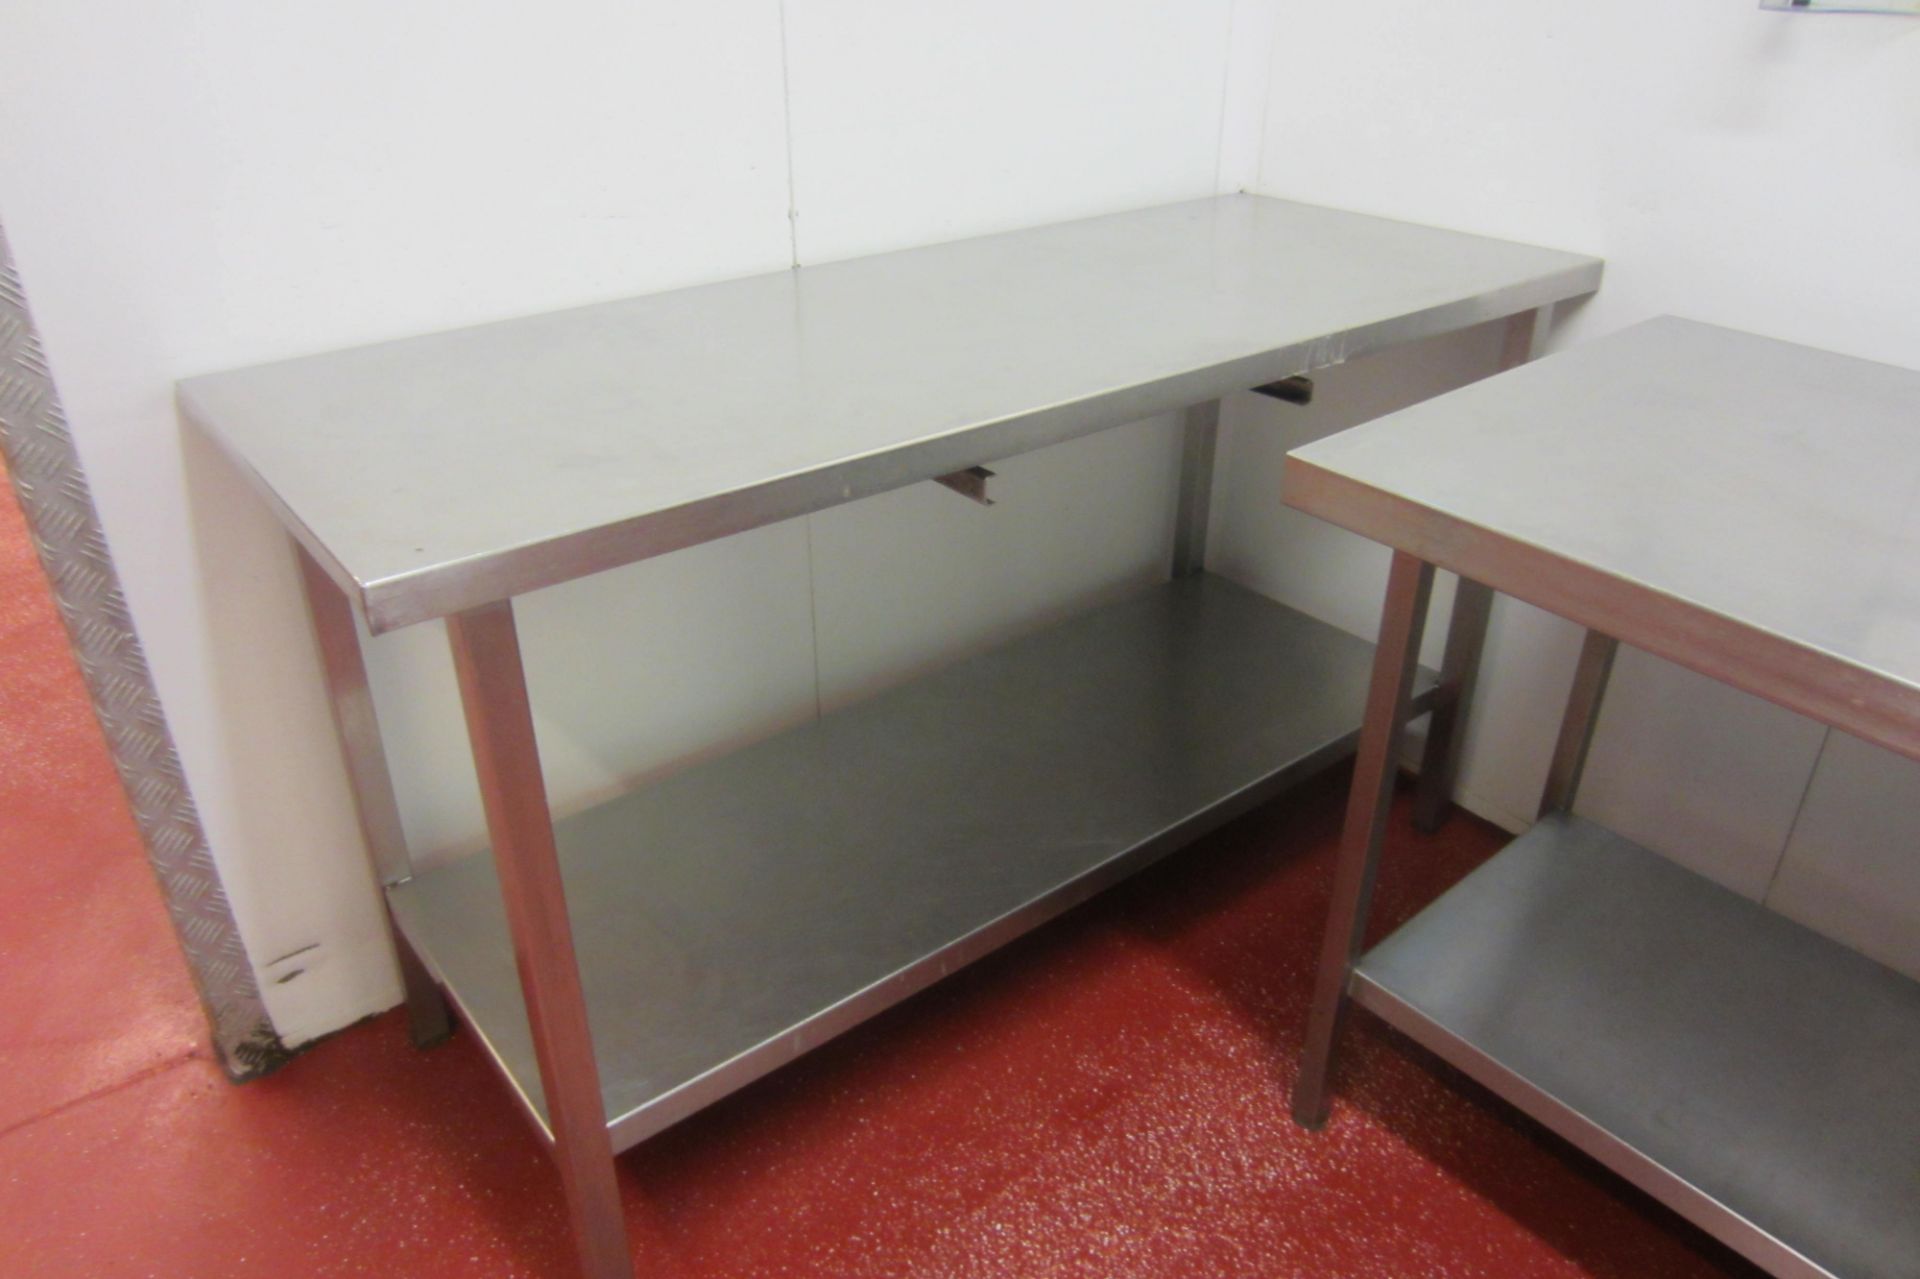 4 x Stainless Steel Prep/Work Tables with Shelves Under. Size 1 x 175cm x 70cm, 1 x 180cm x 70cm, - Image 6 of 6